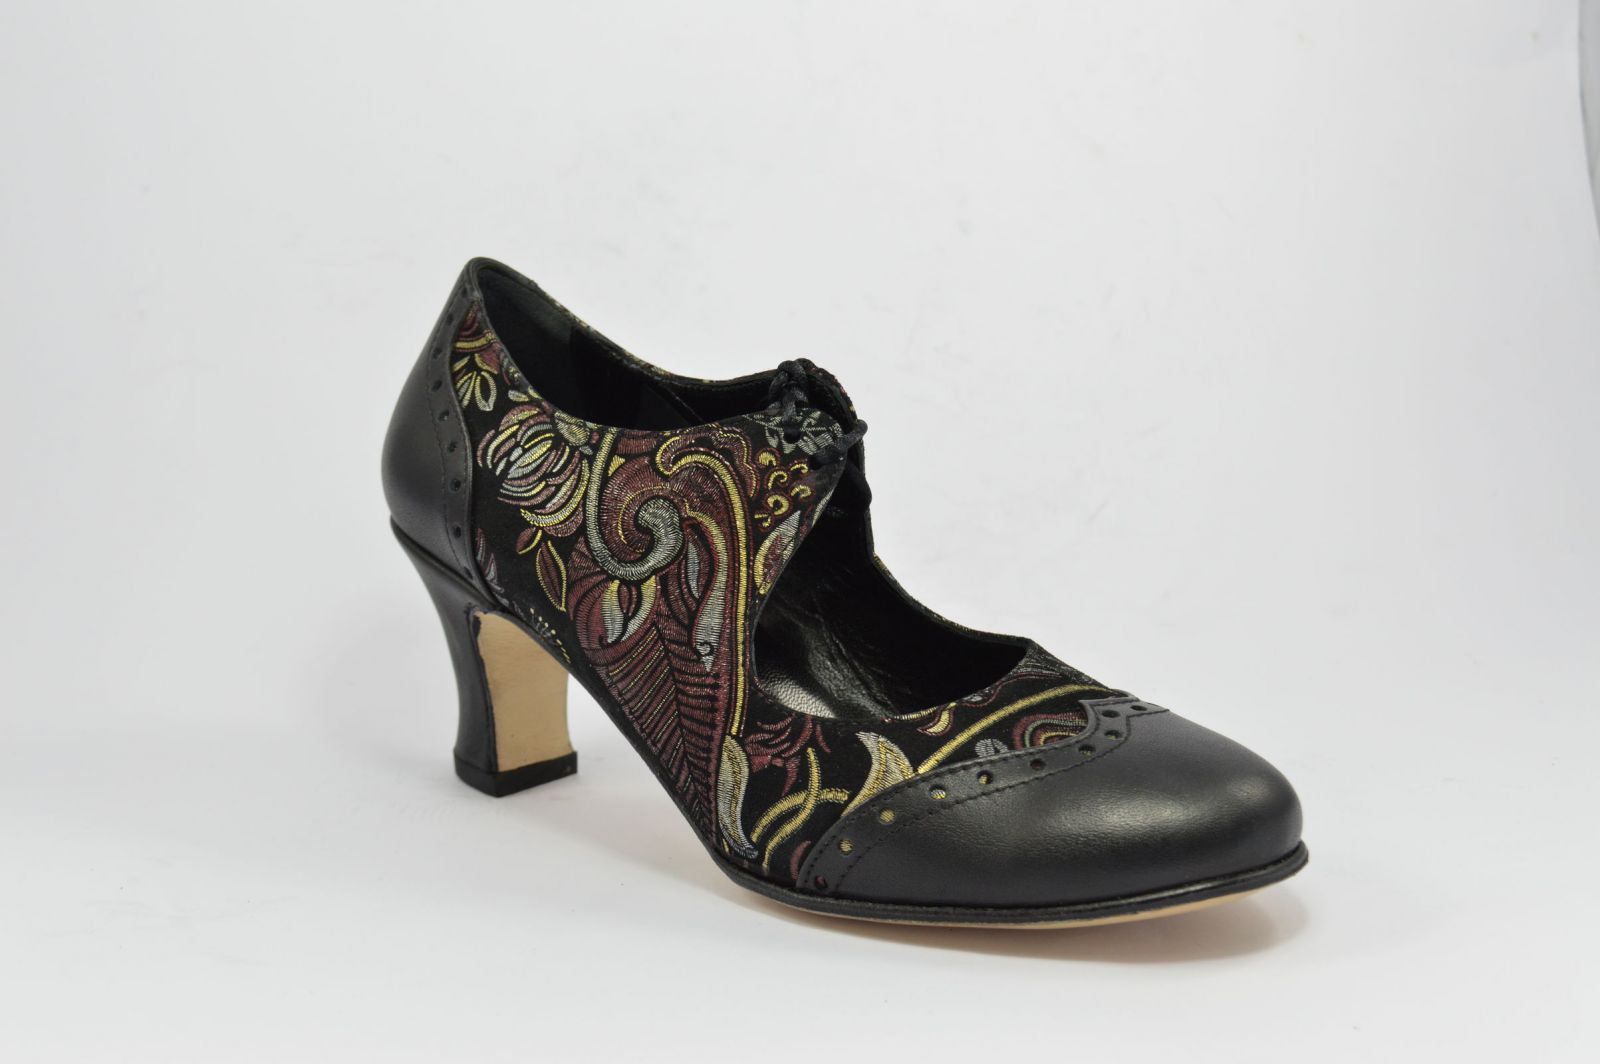 Women dance shoes, oxford style, by soft black suede leather with paisley prints and black leather.